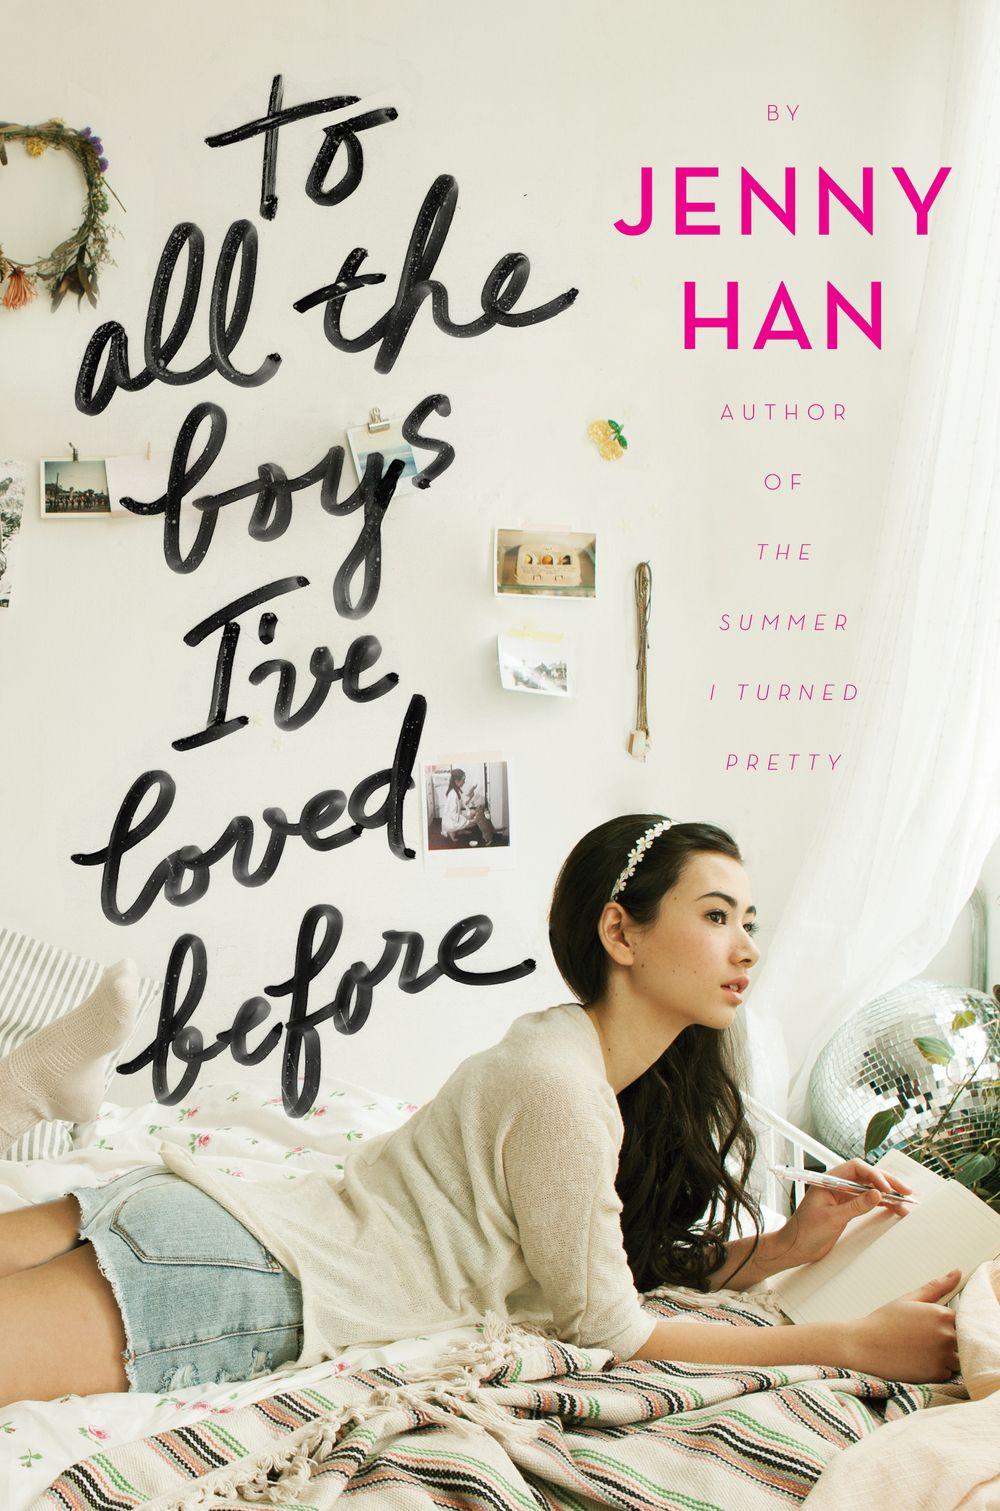 Jenny Han’s ‘To All The Boys I’ve Loved Before’ Book Review